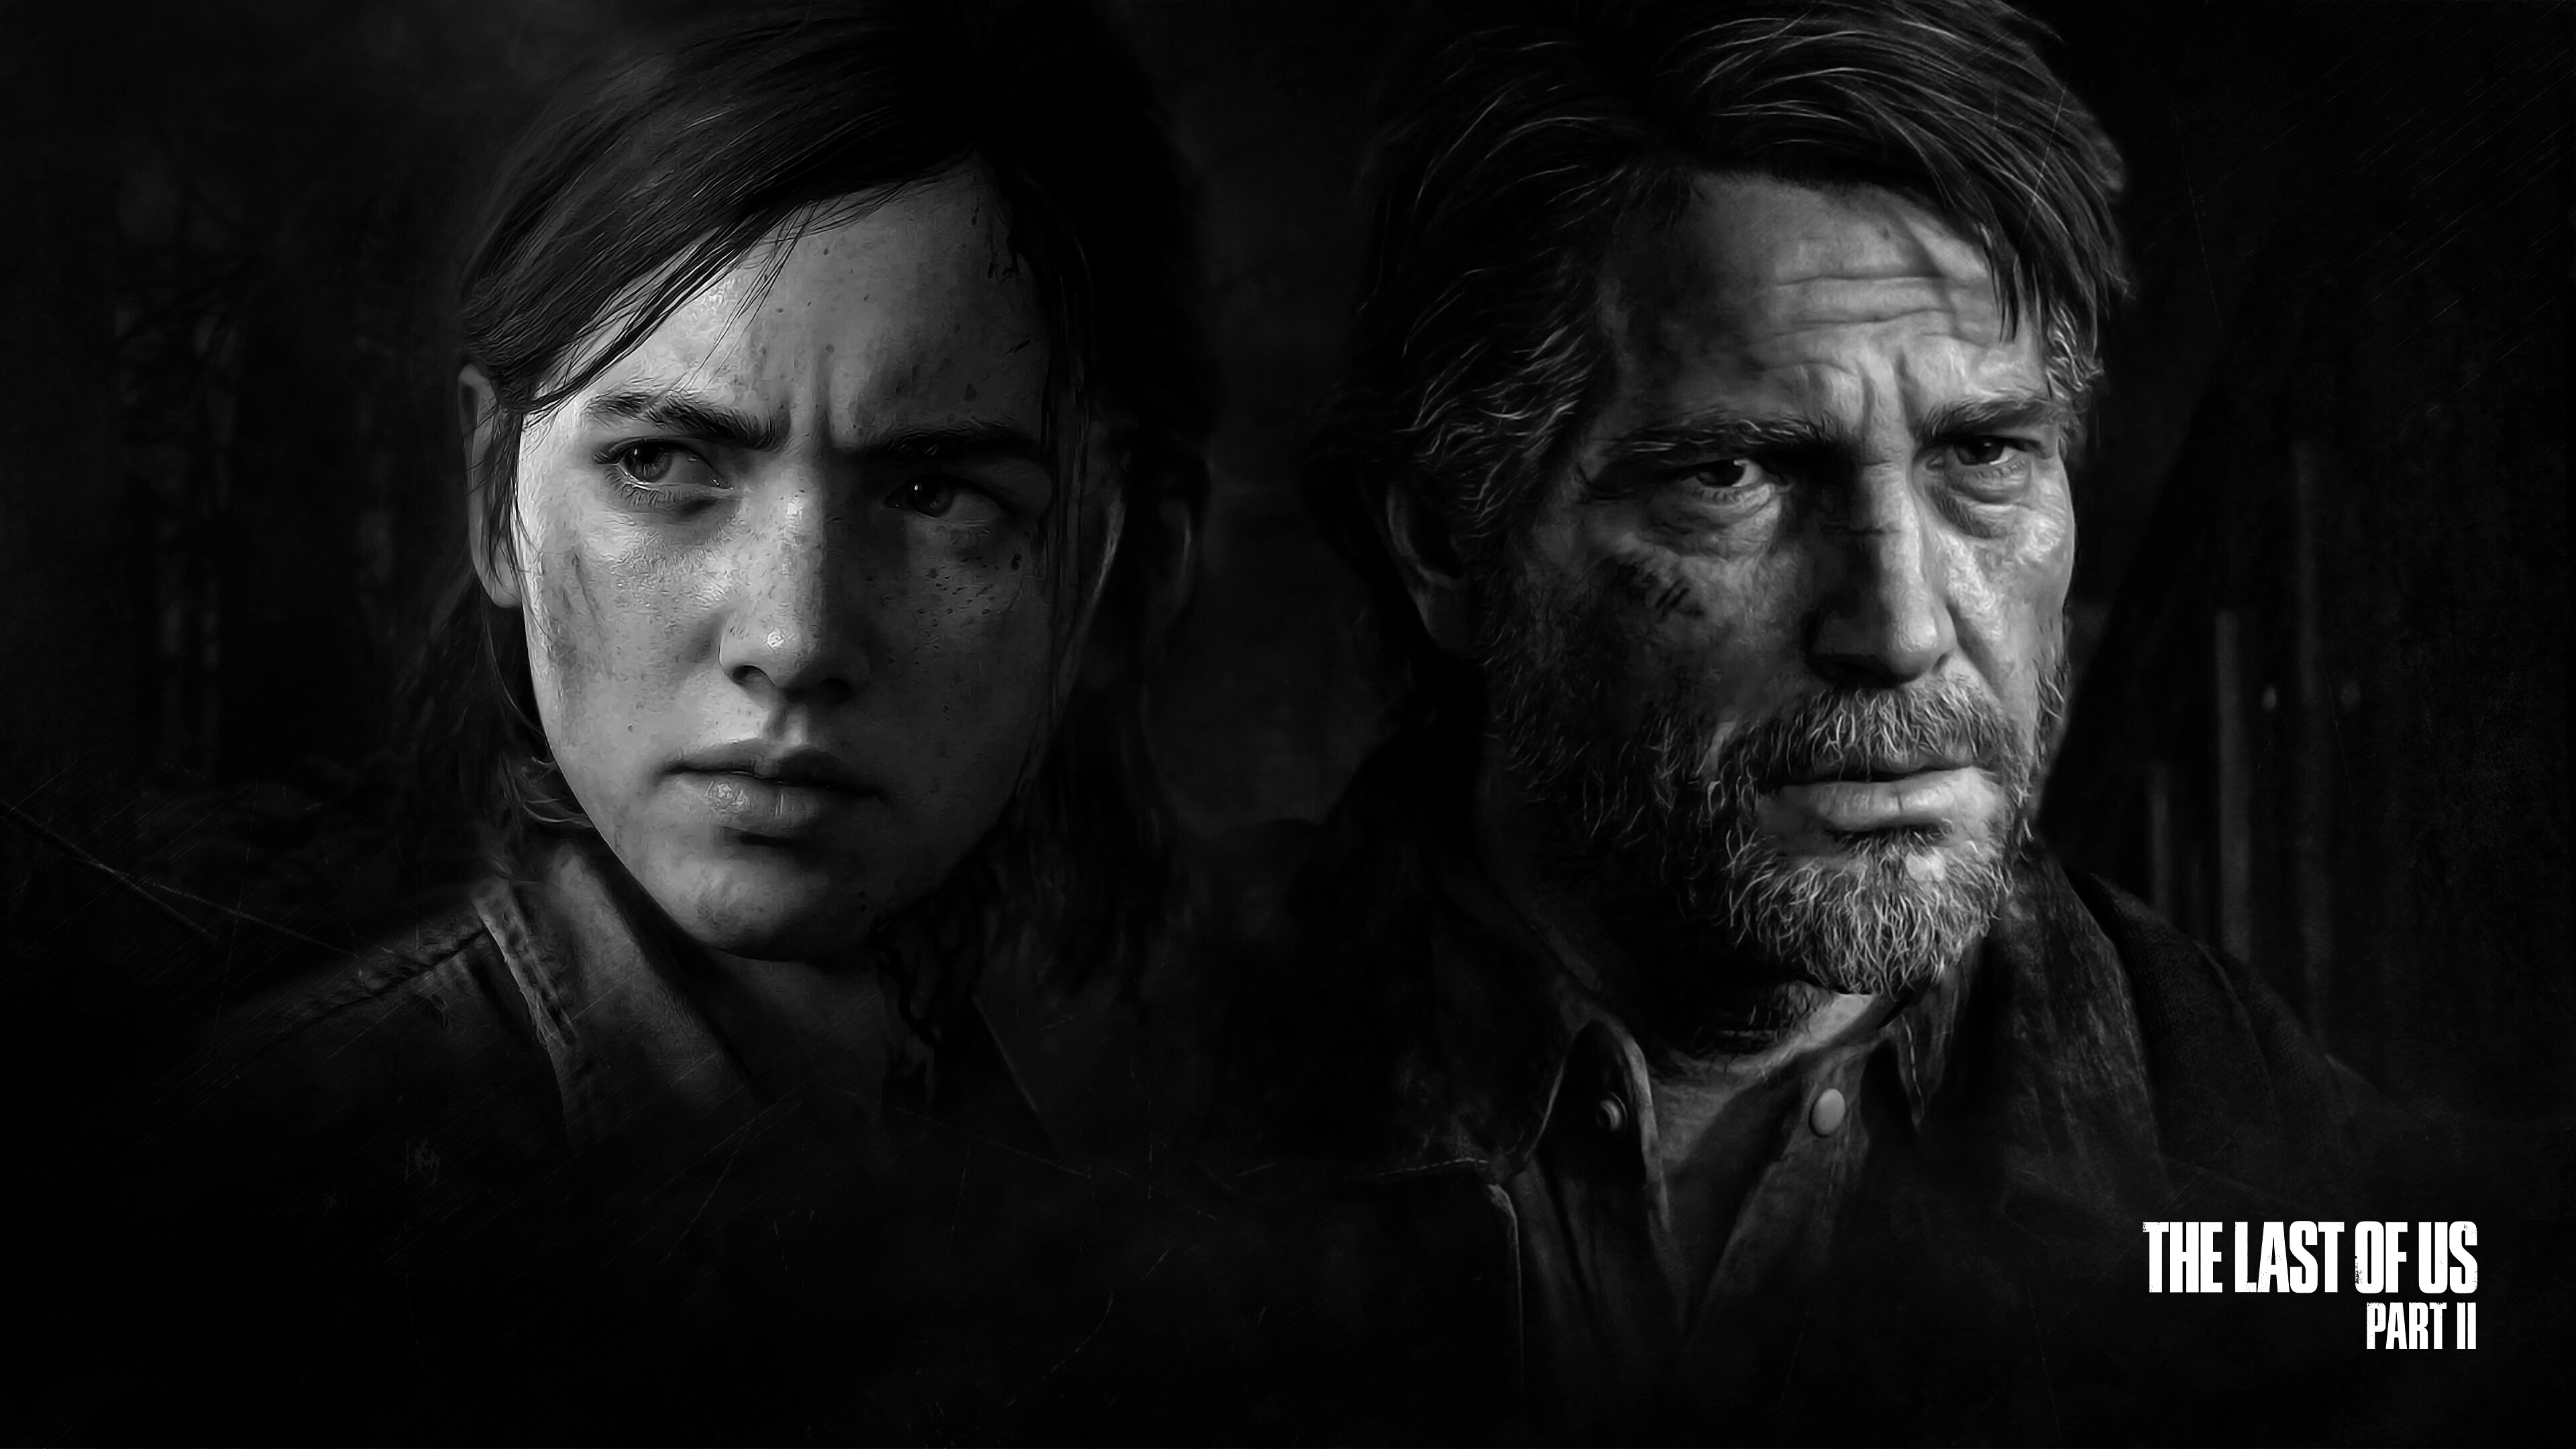 The Last of Us: Players control Joel, a smuggler tasked with escorting a teenage girl, Ellie, across a post-apocalyptic United States. 3840x2160 4K Wallpaper.